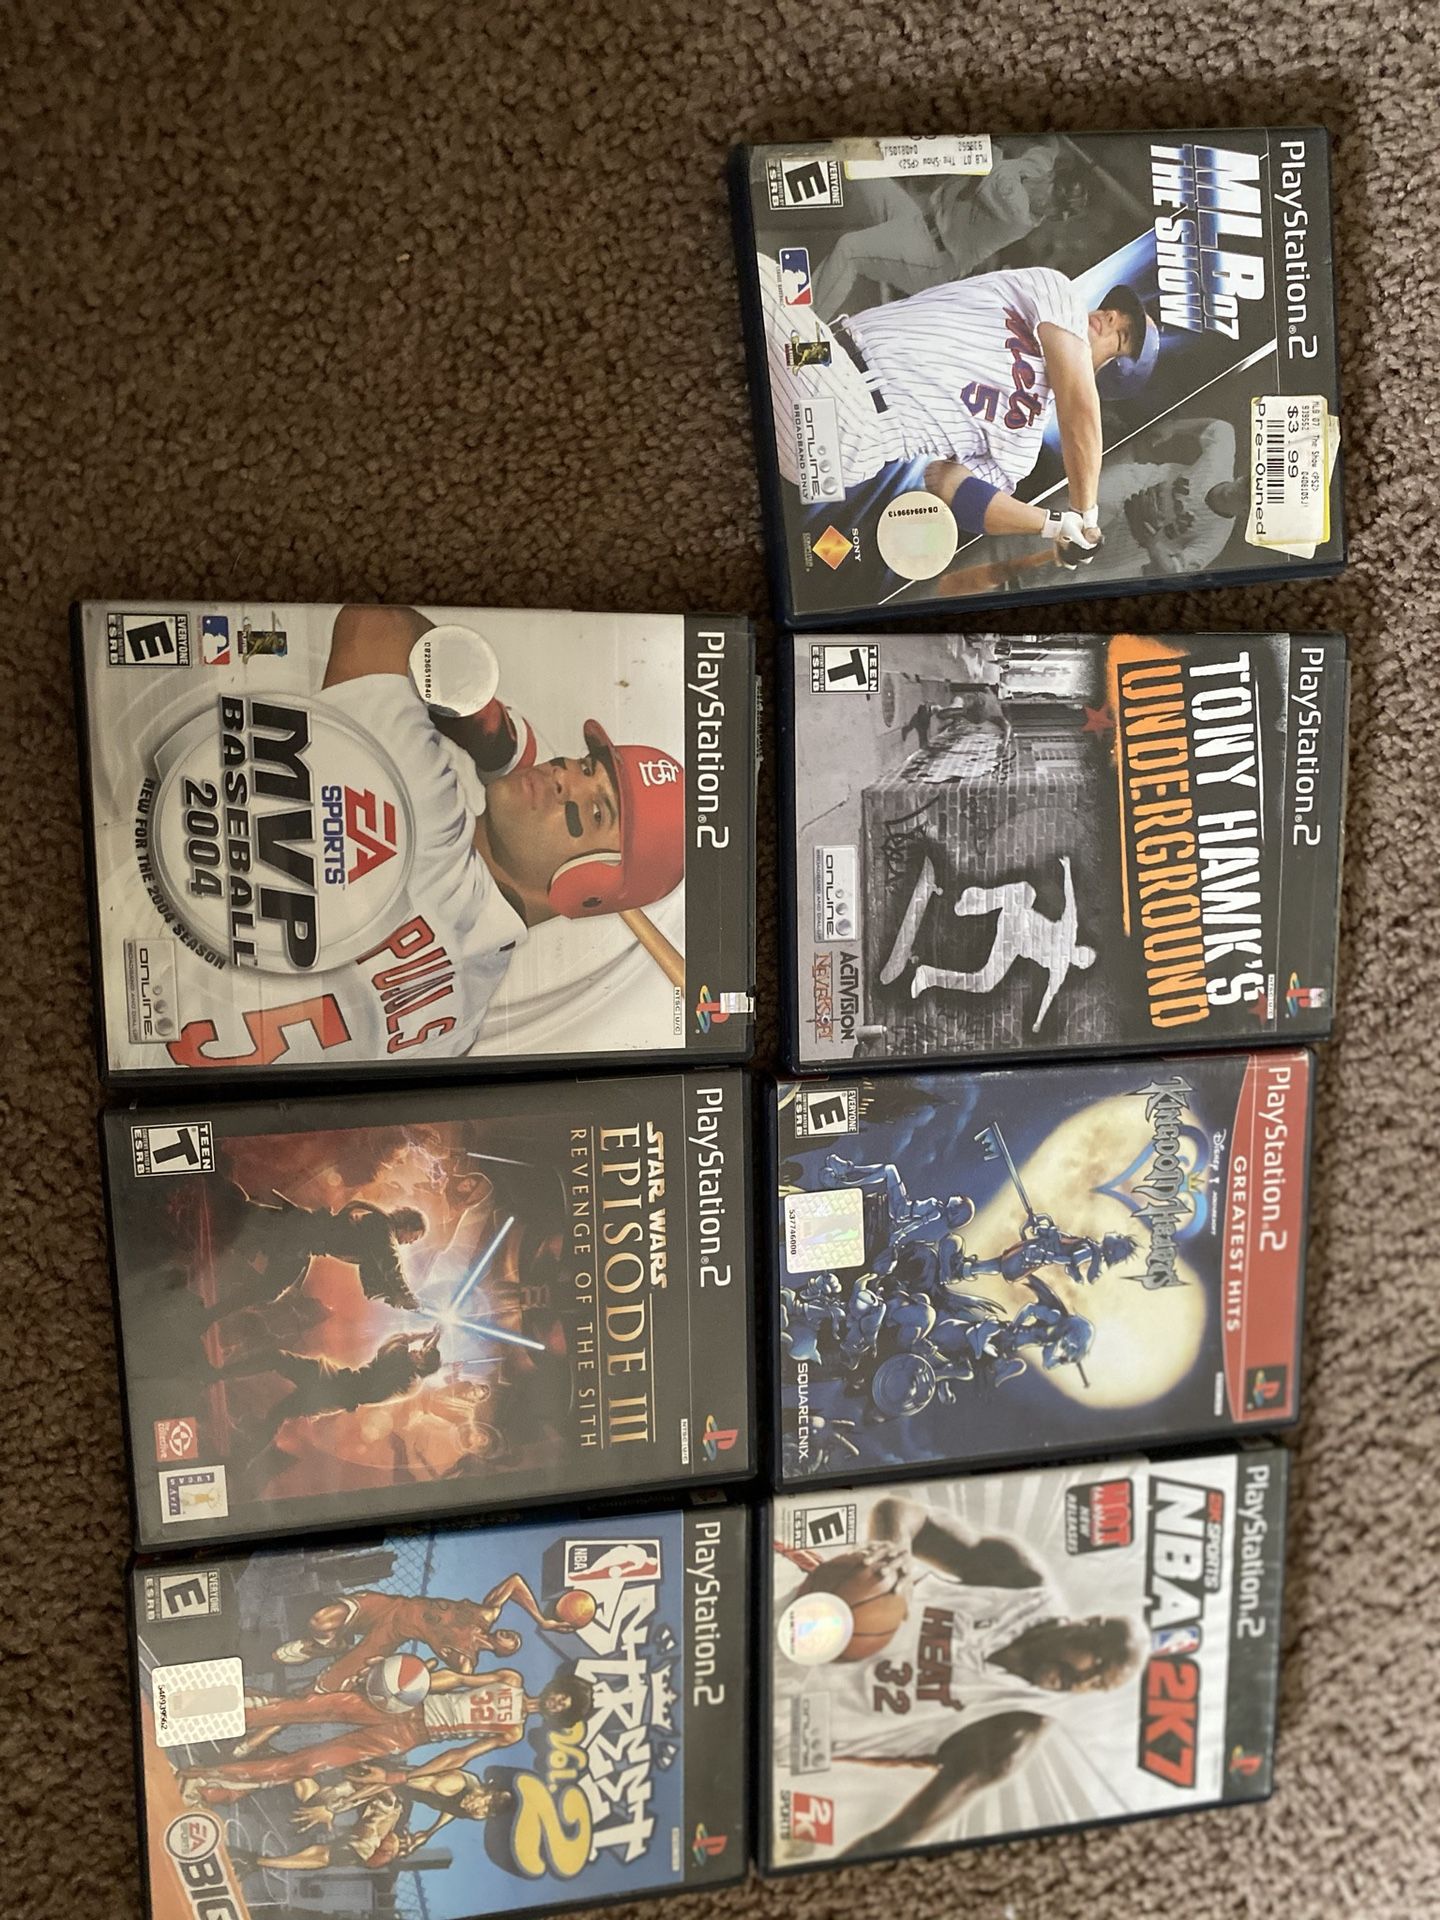 PS2 Games (15 games) - $20 For All Games